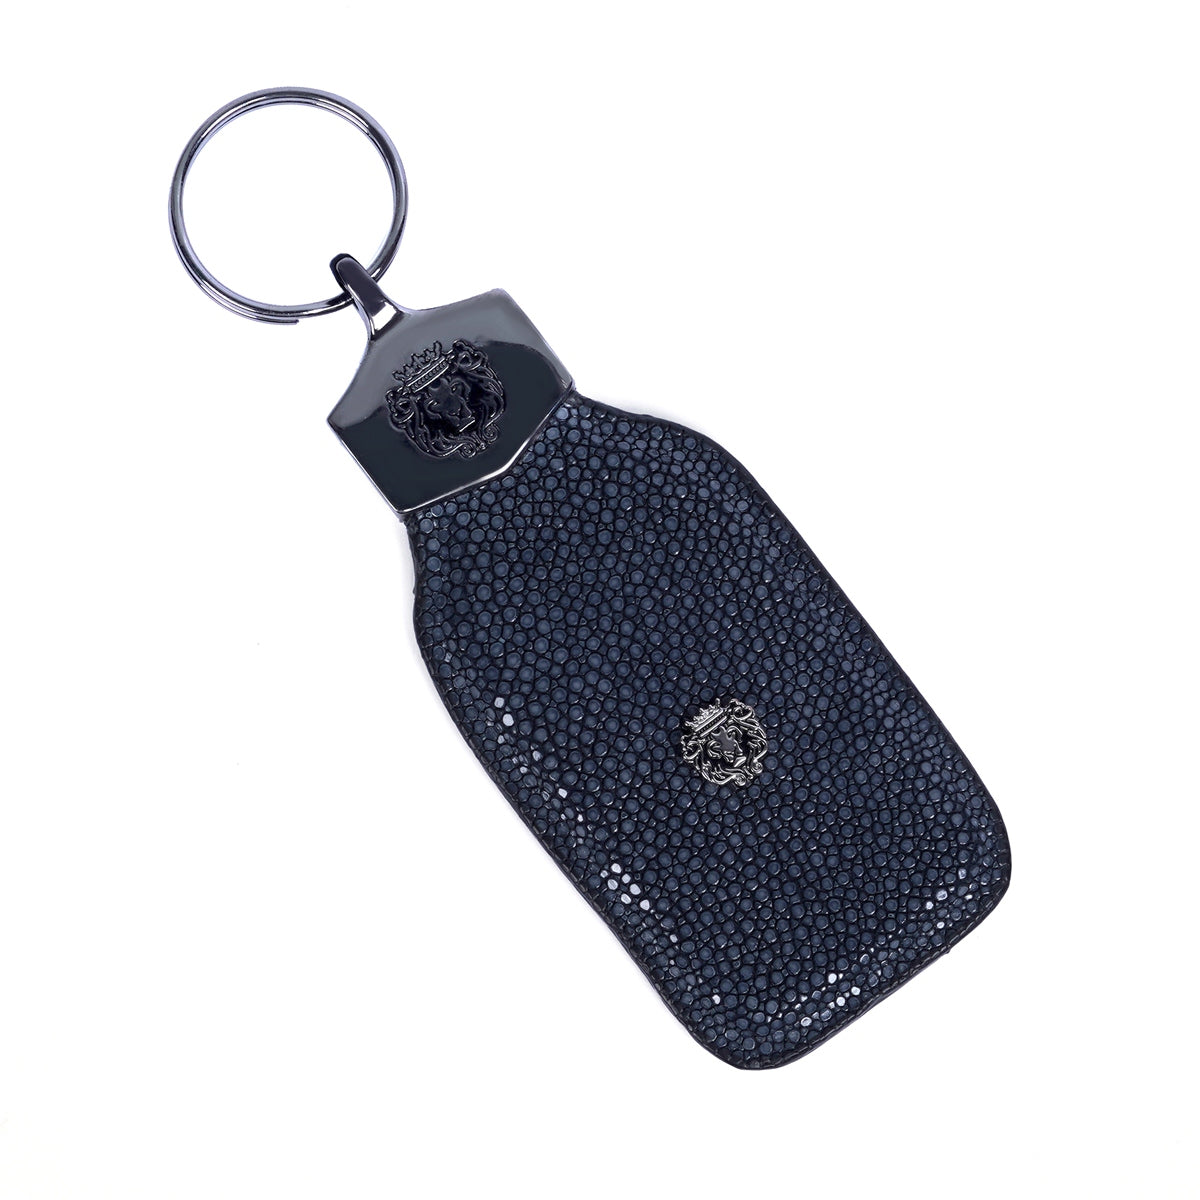 RACE MINDS Leather Keychain Key Ring Hook Keychain Holder Car & Bike  Keychain Heavy Duty Keychain for Men and Women 26 : Amazon.in: Bags,  Wallets and Luggage